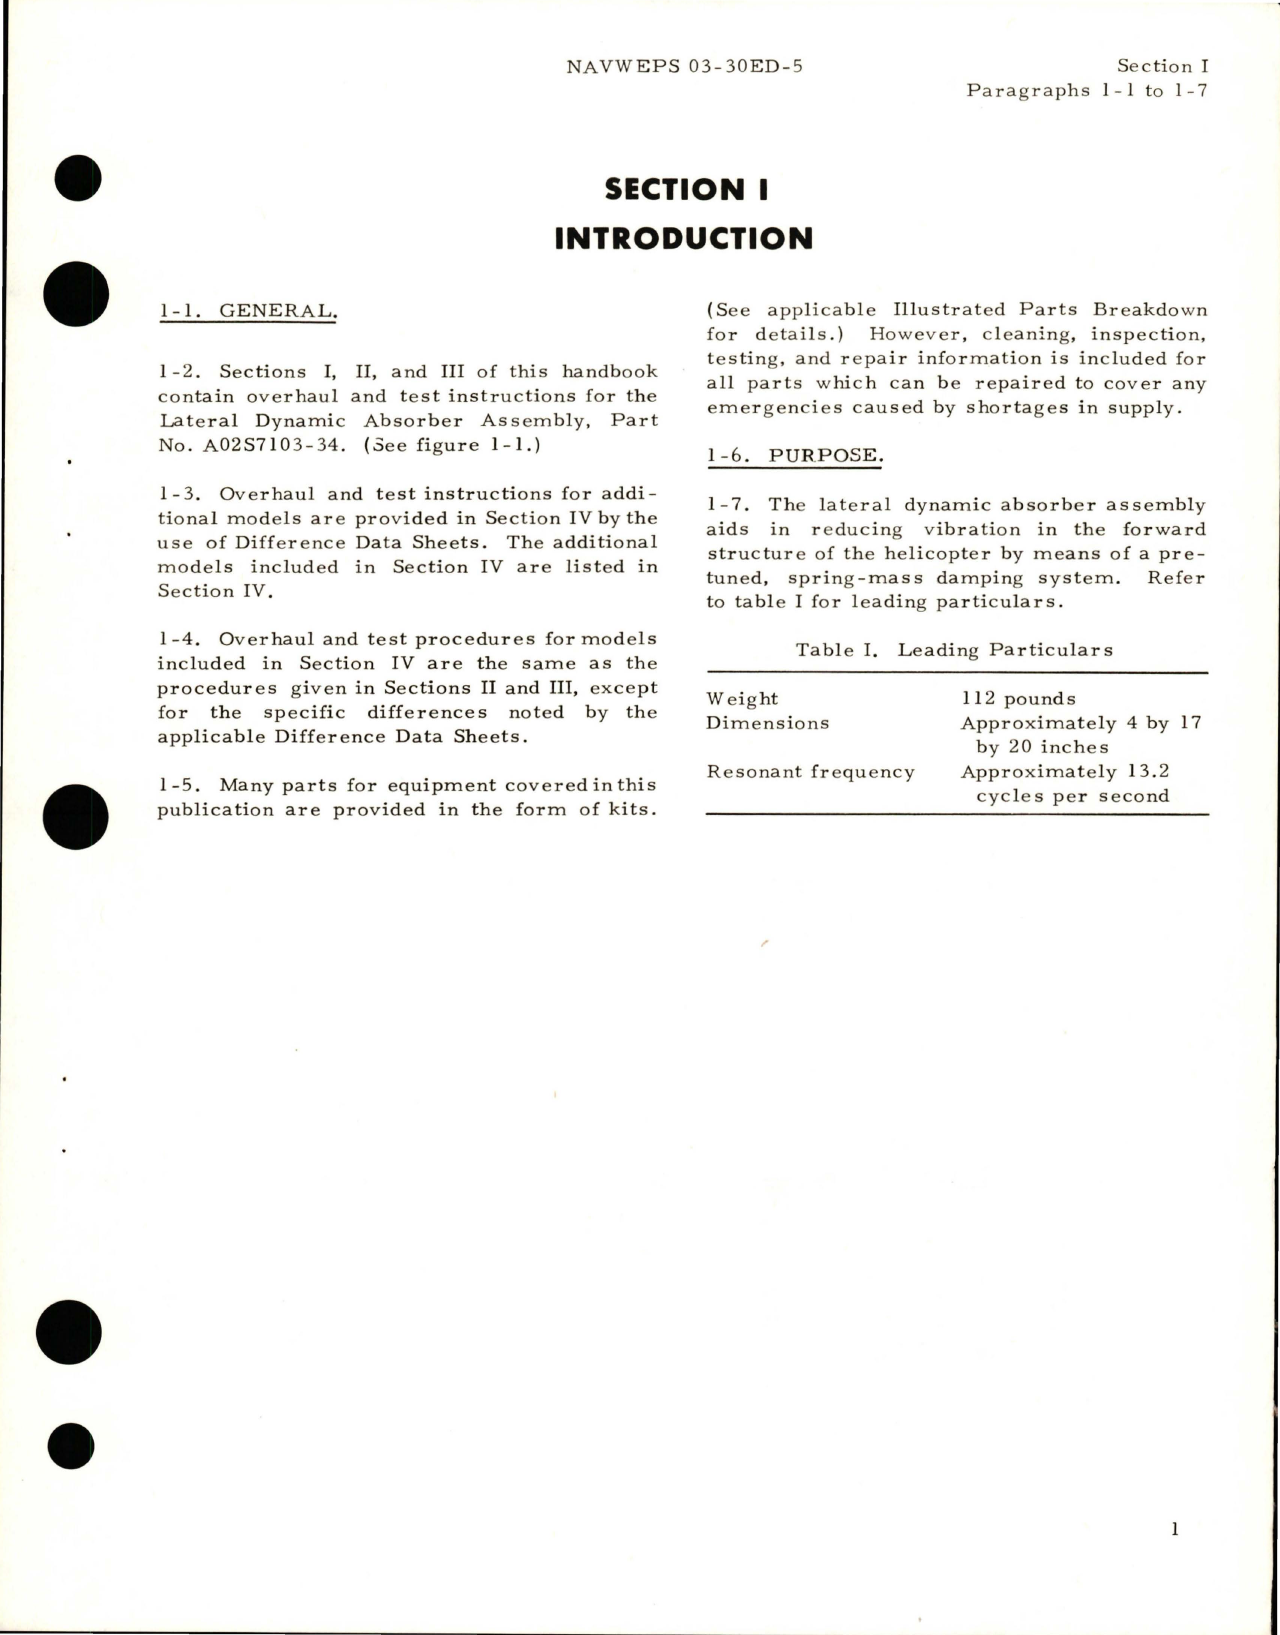 Sample page 5 from AirCorps Library document: Overhaul Instructions for Lateral Dynamic Absorber Assembly - Part A02S7103-34 and A02S7103-41